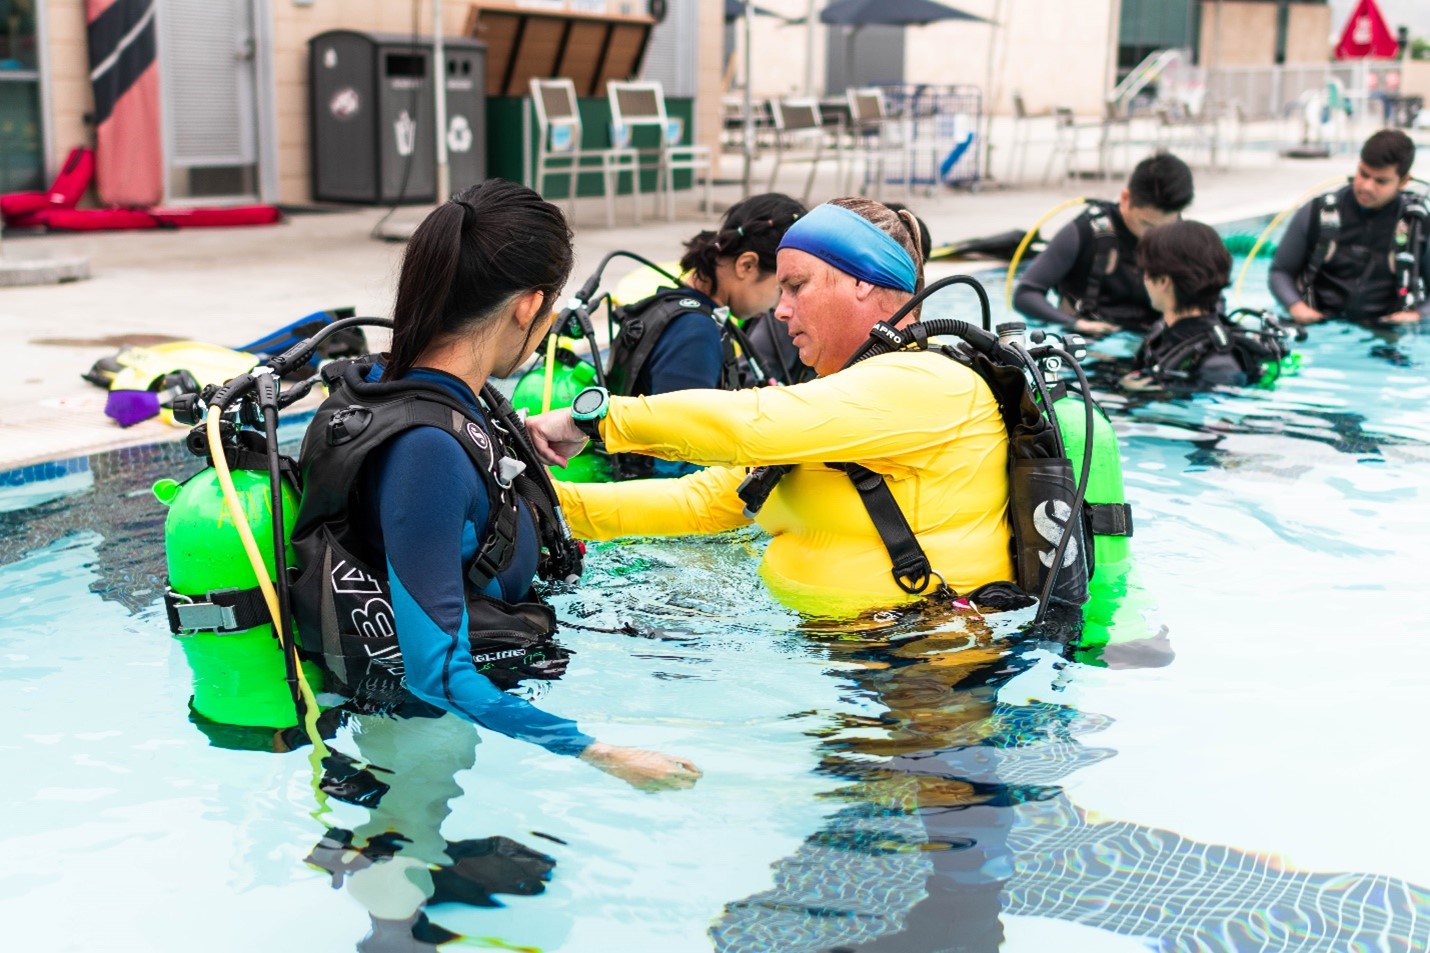 Instructor assisting a student with their scuba gear